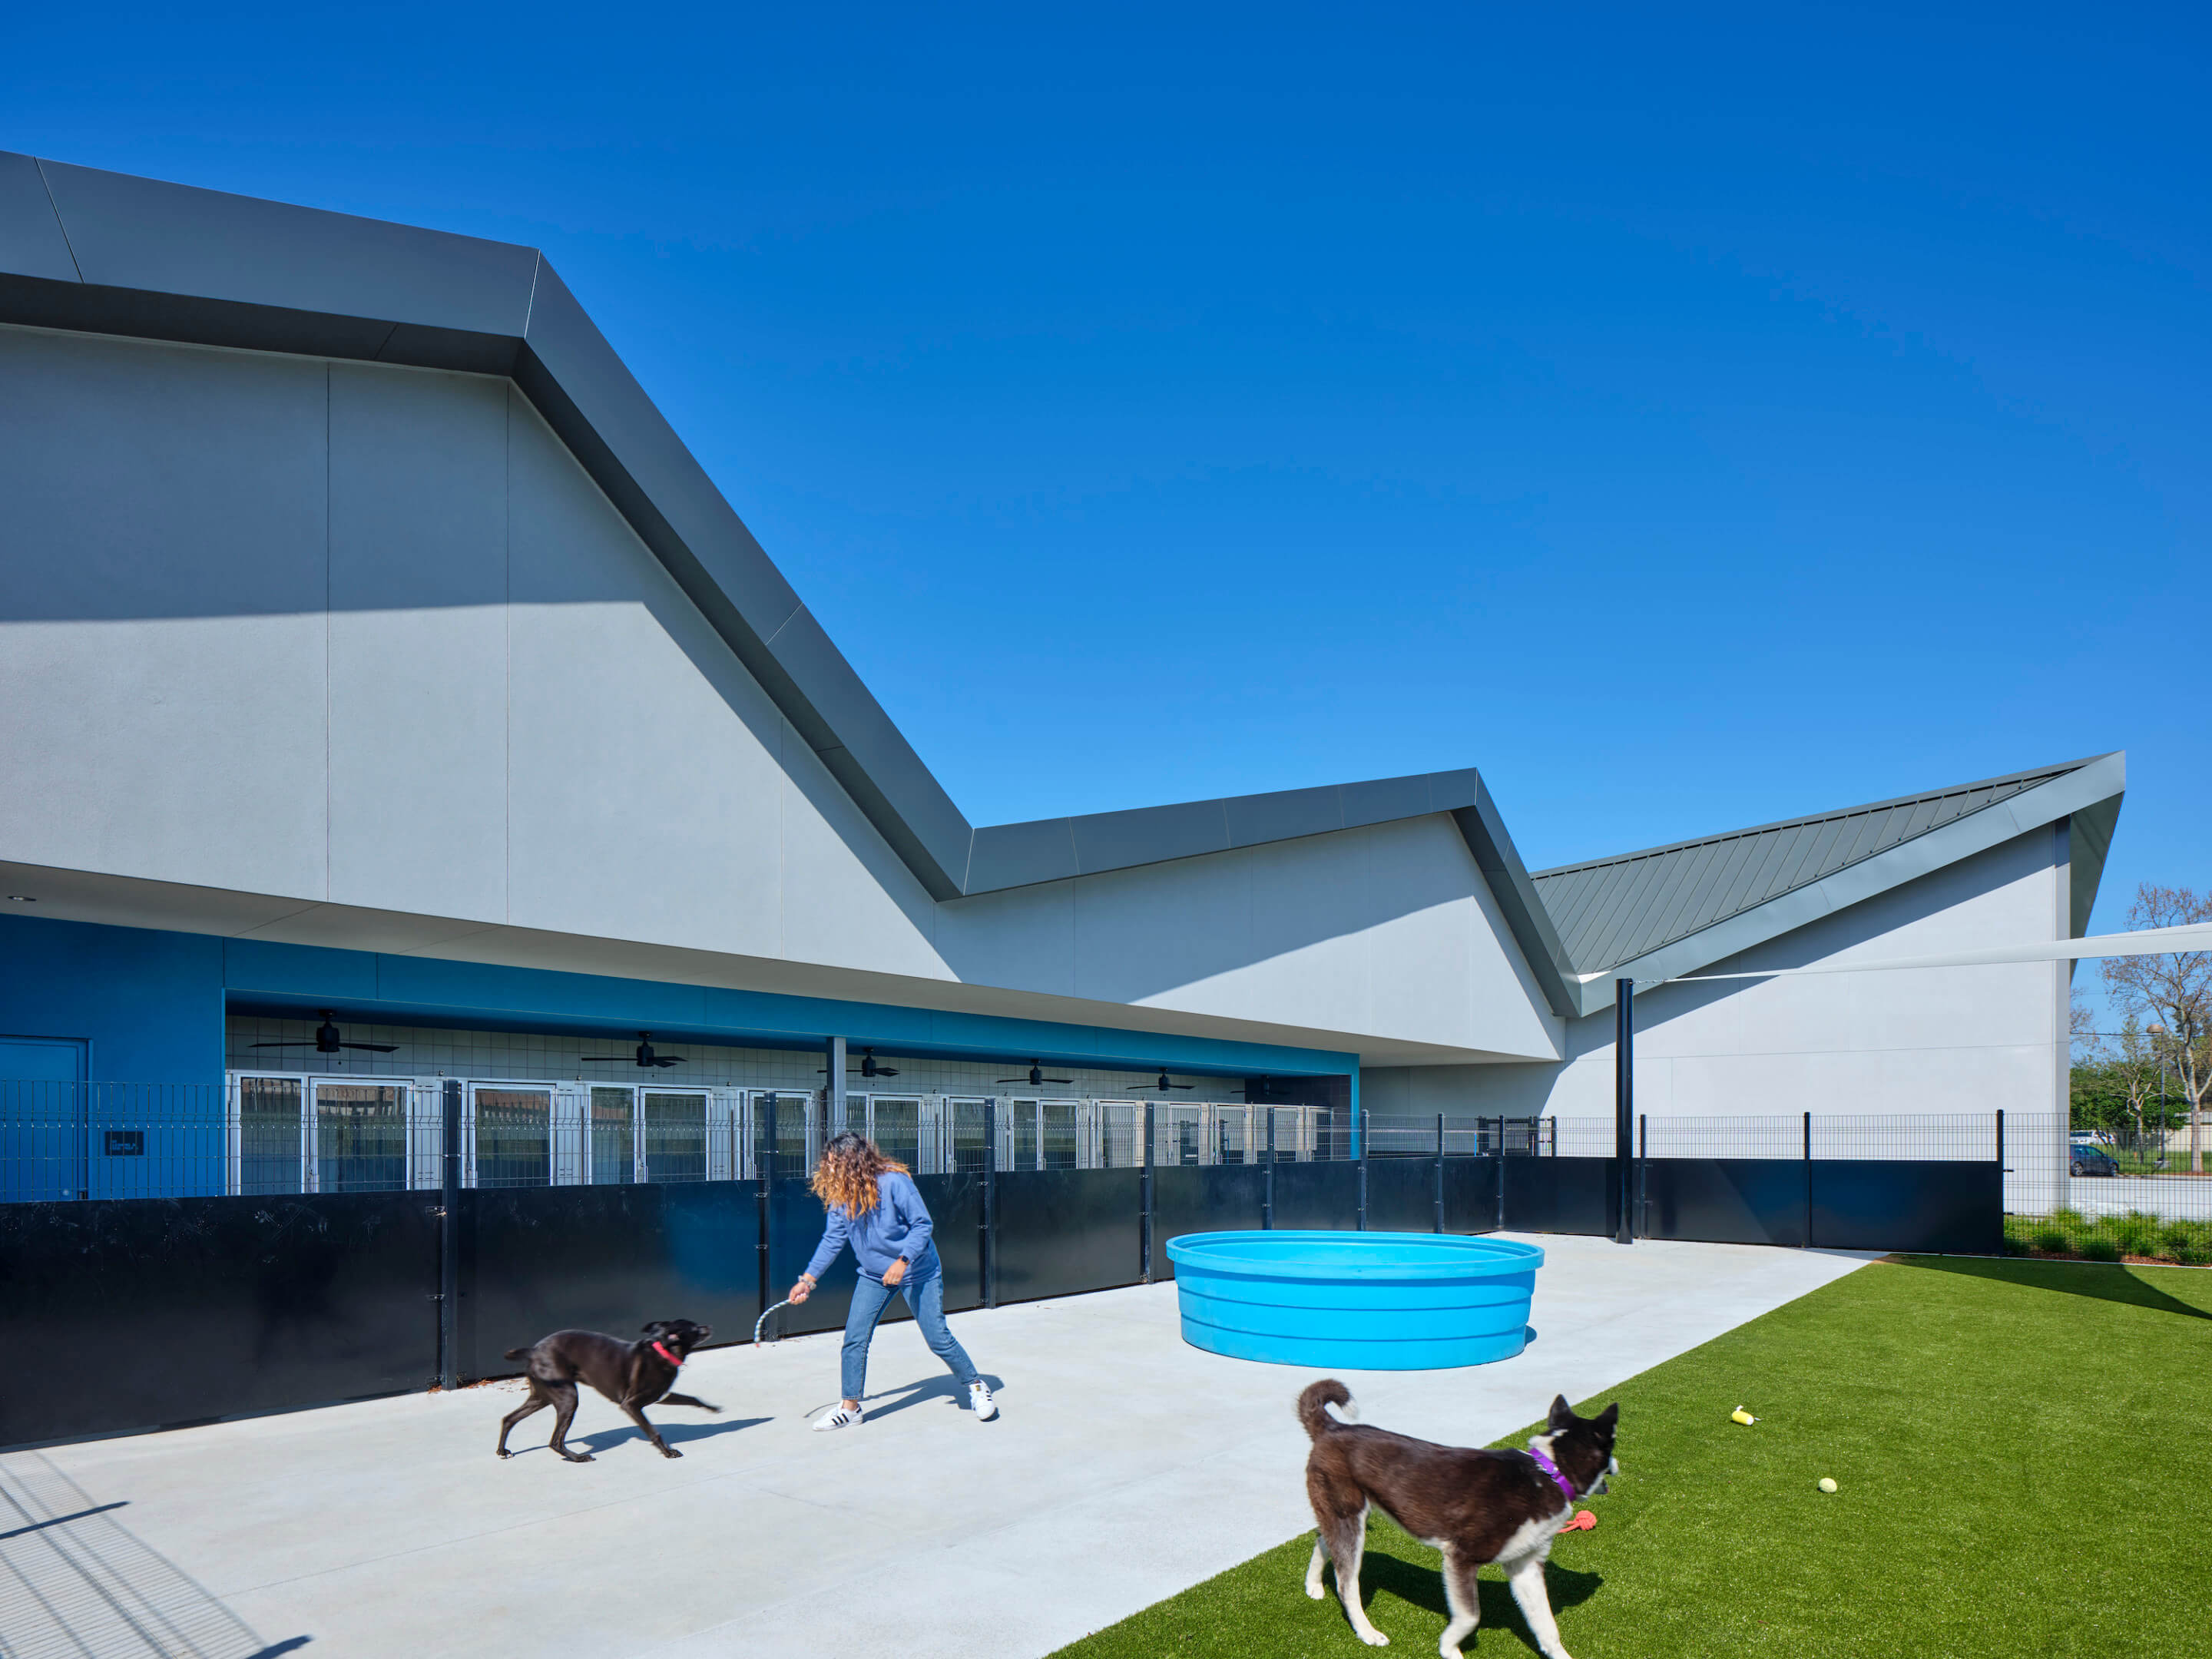 The County of Santa Clara Animal Services Center reimagines the  conventional shelter